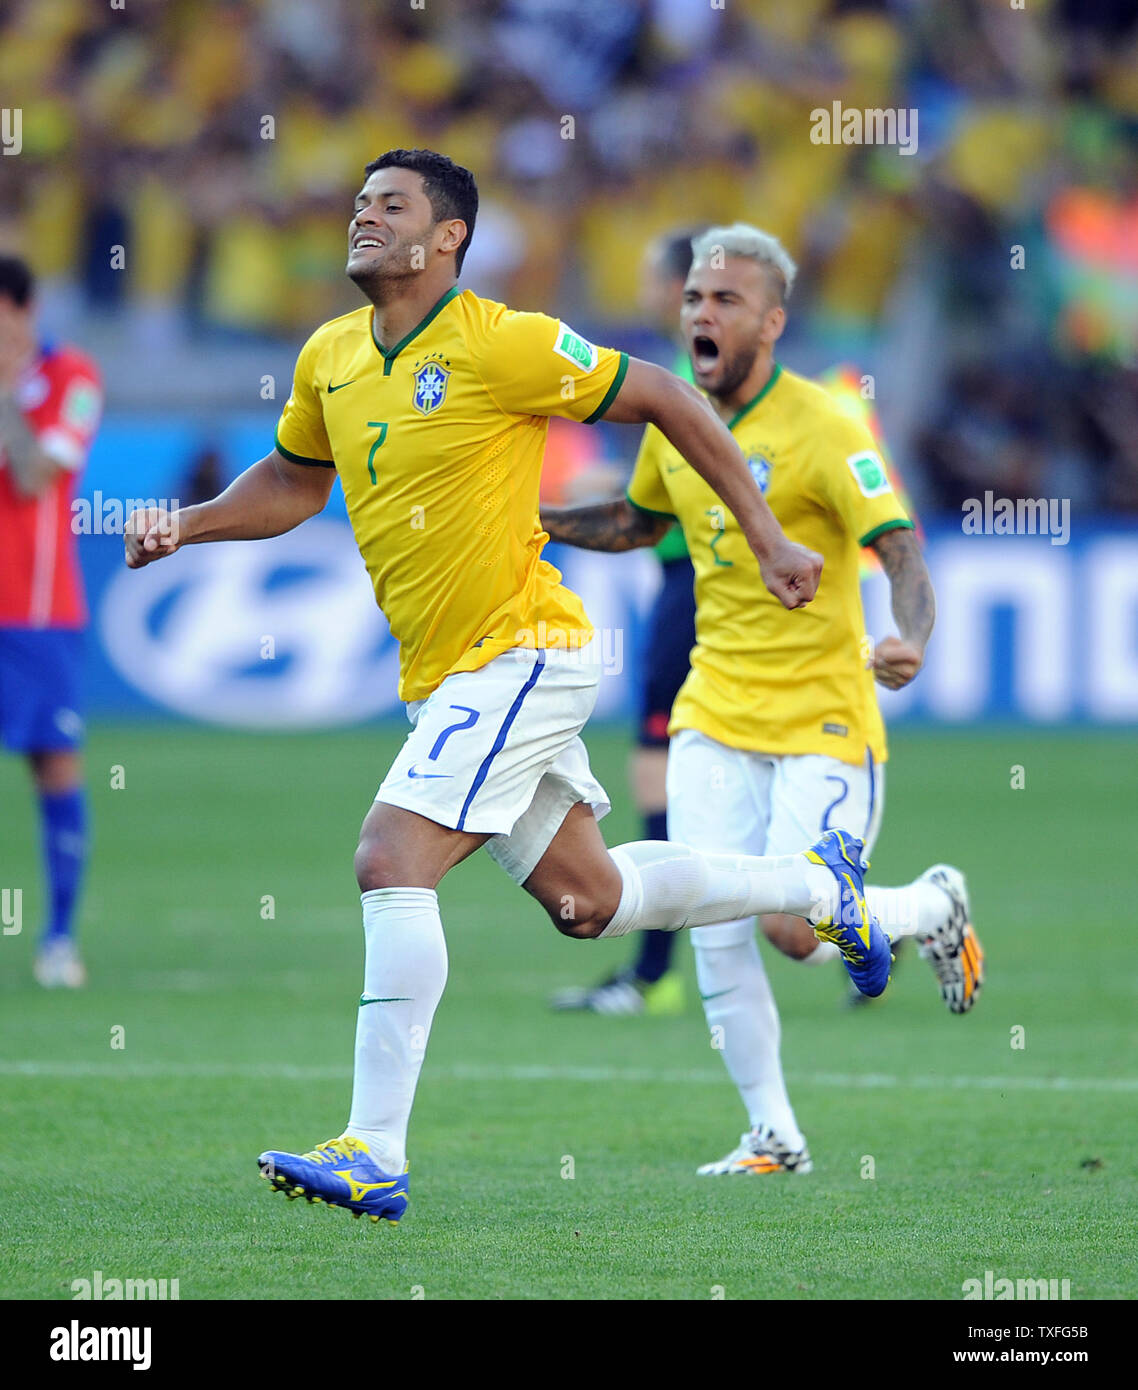 Hulk of Brazil celebrates at full-time following the 2014 FIFA World Cup Round of 16 match at the Estadio Mineirao in Belo Horizonte, Brazil on June 28, 2014. UPI/Chris Brunskill Stock Photo